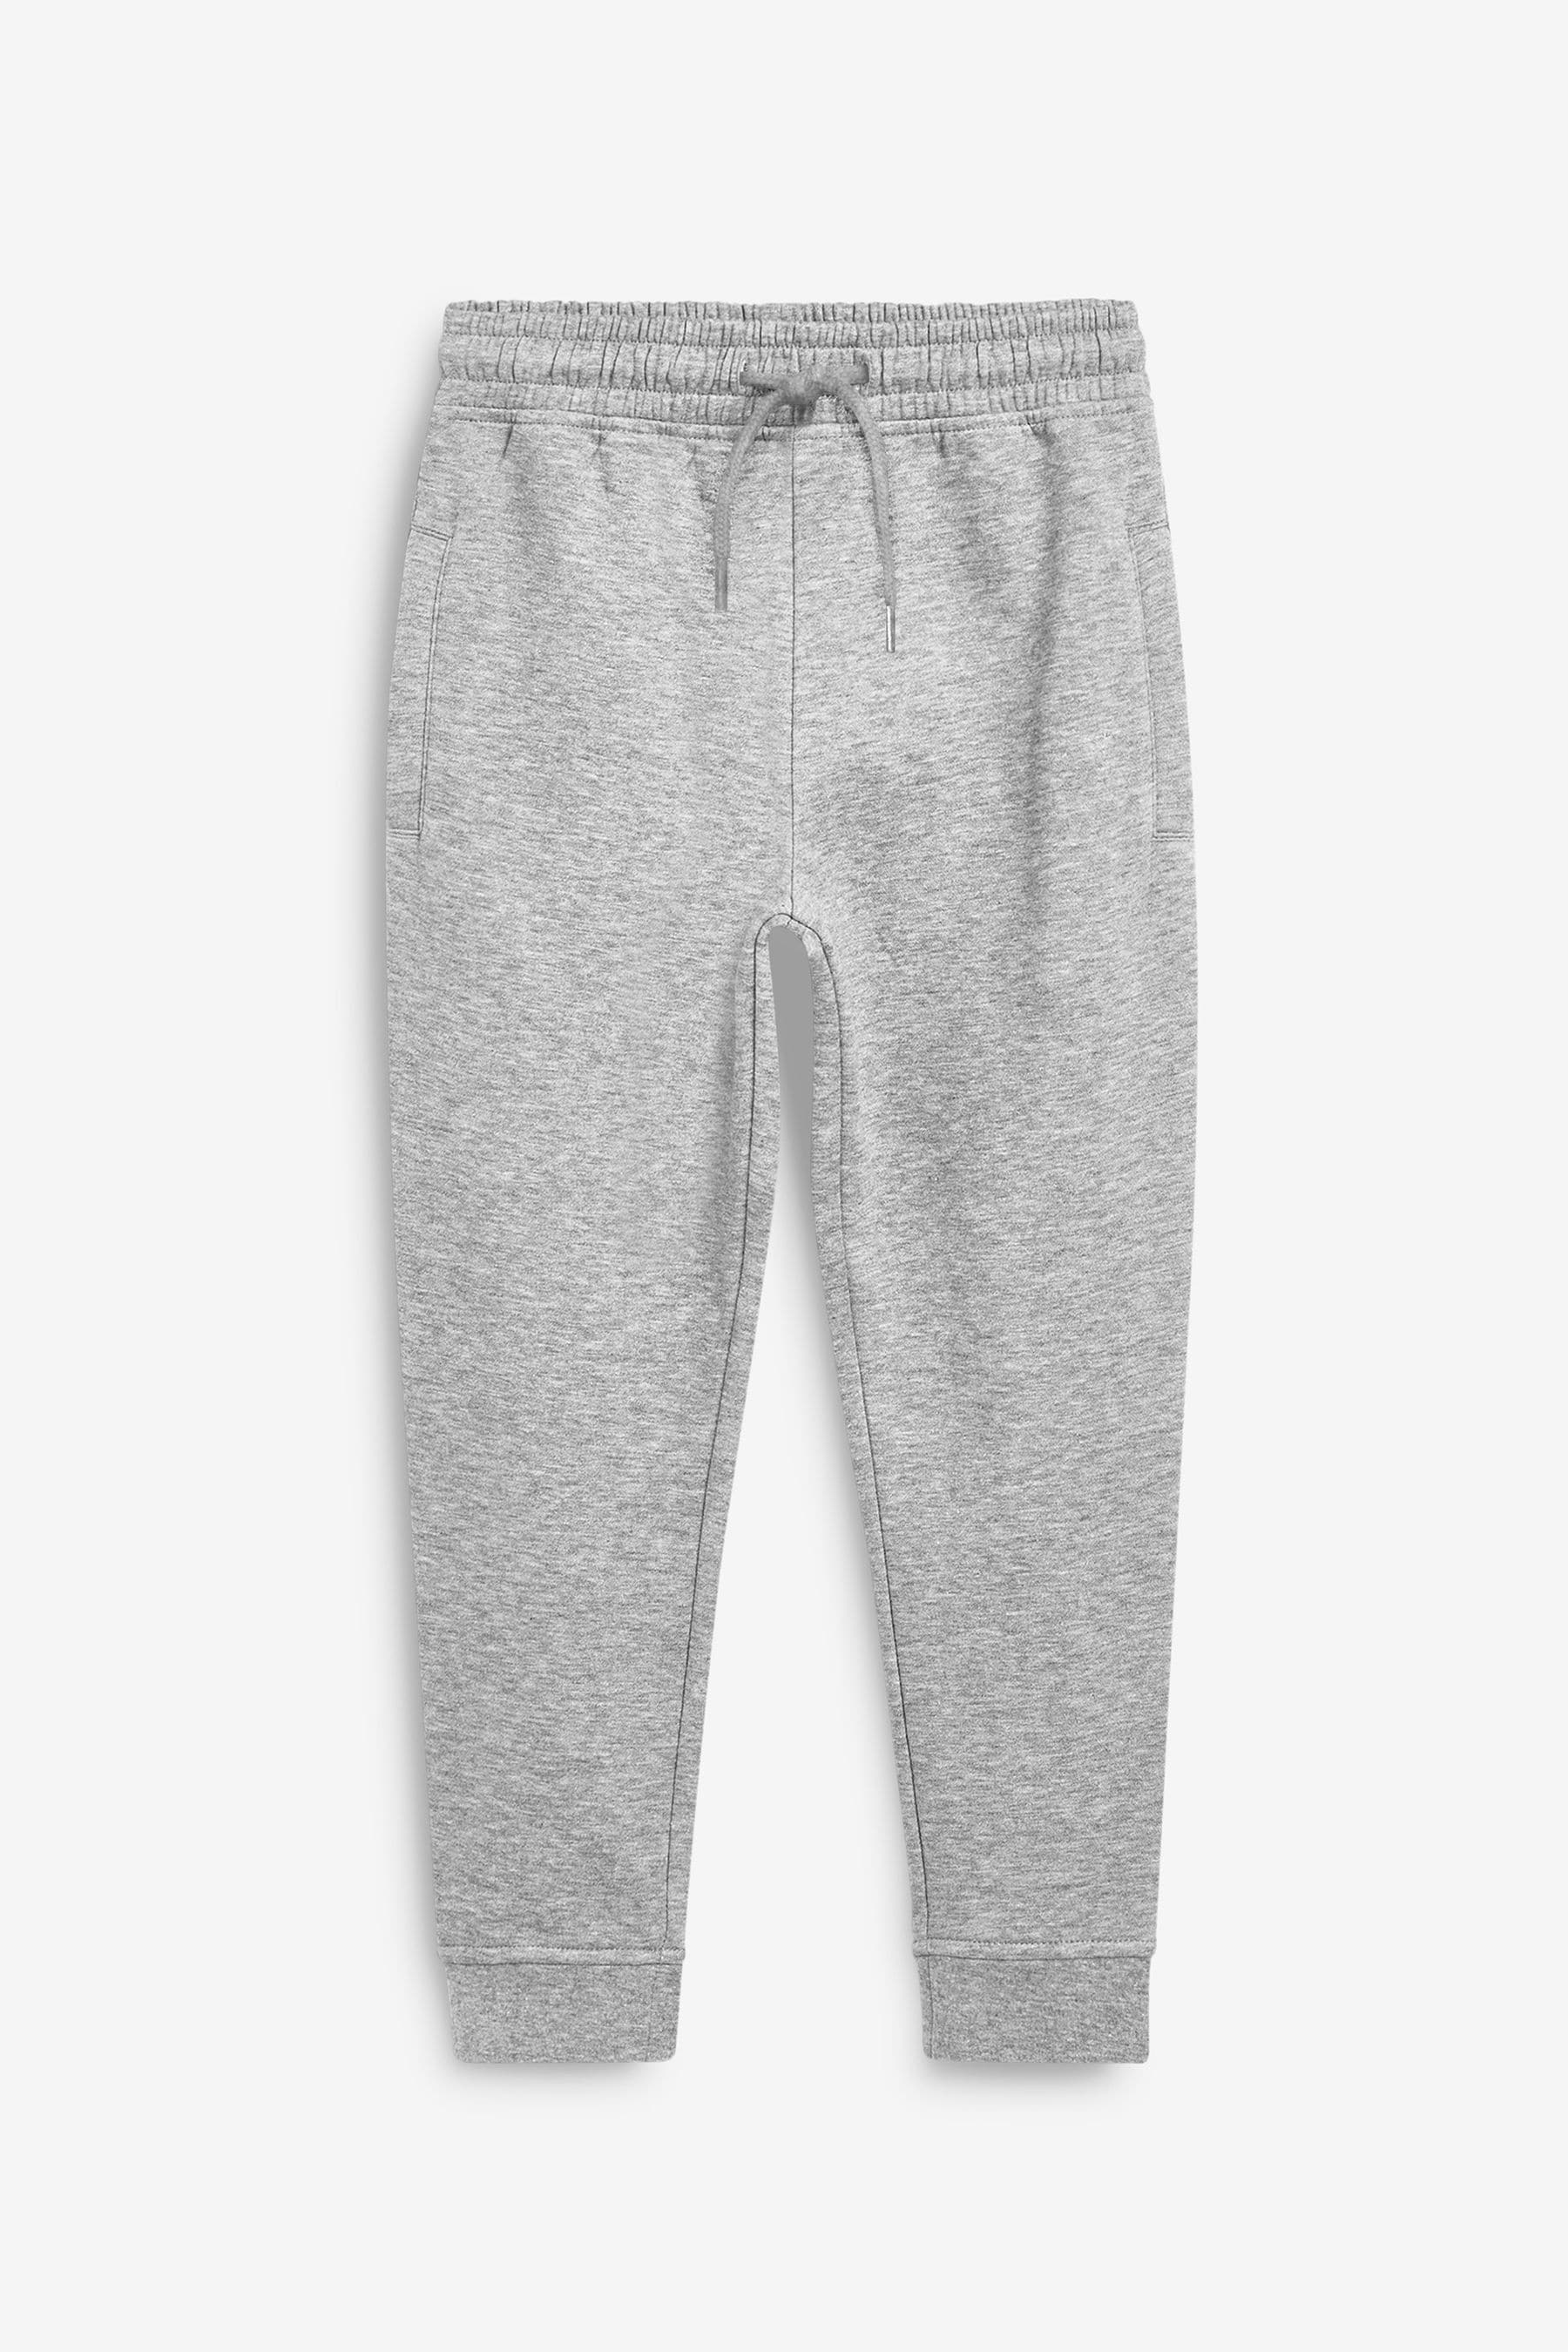 Buy Grey Slim Fit Cuffed Joggers (3-16yrs) from the Next UK online shop